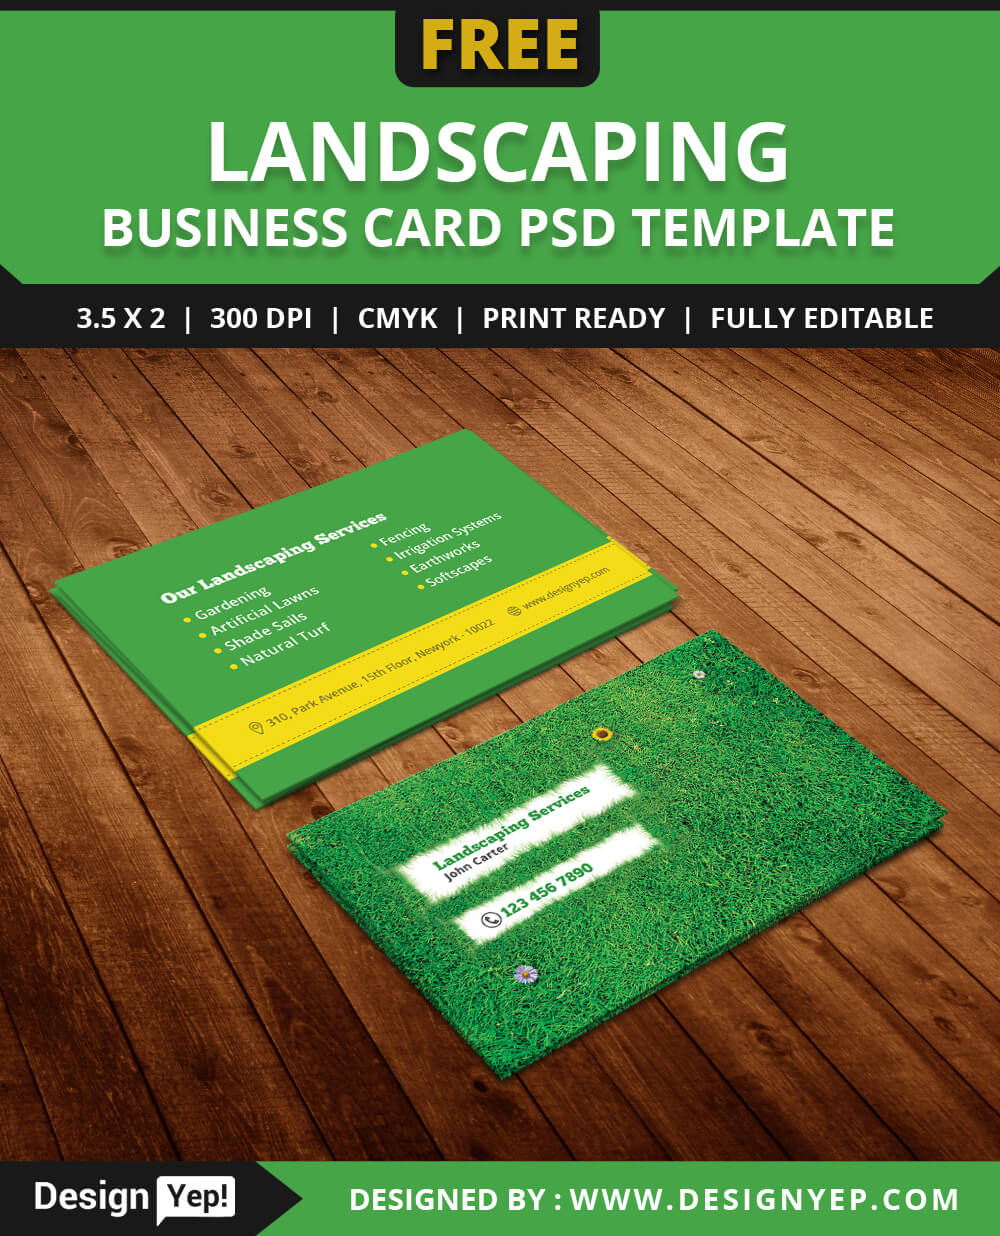 free-landscaping-business-card-template-psd-designyep-intended-for-gardening-business-cards